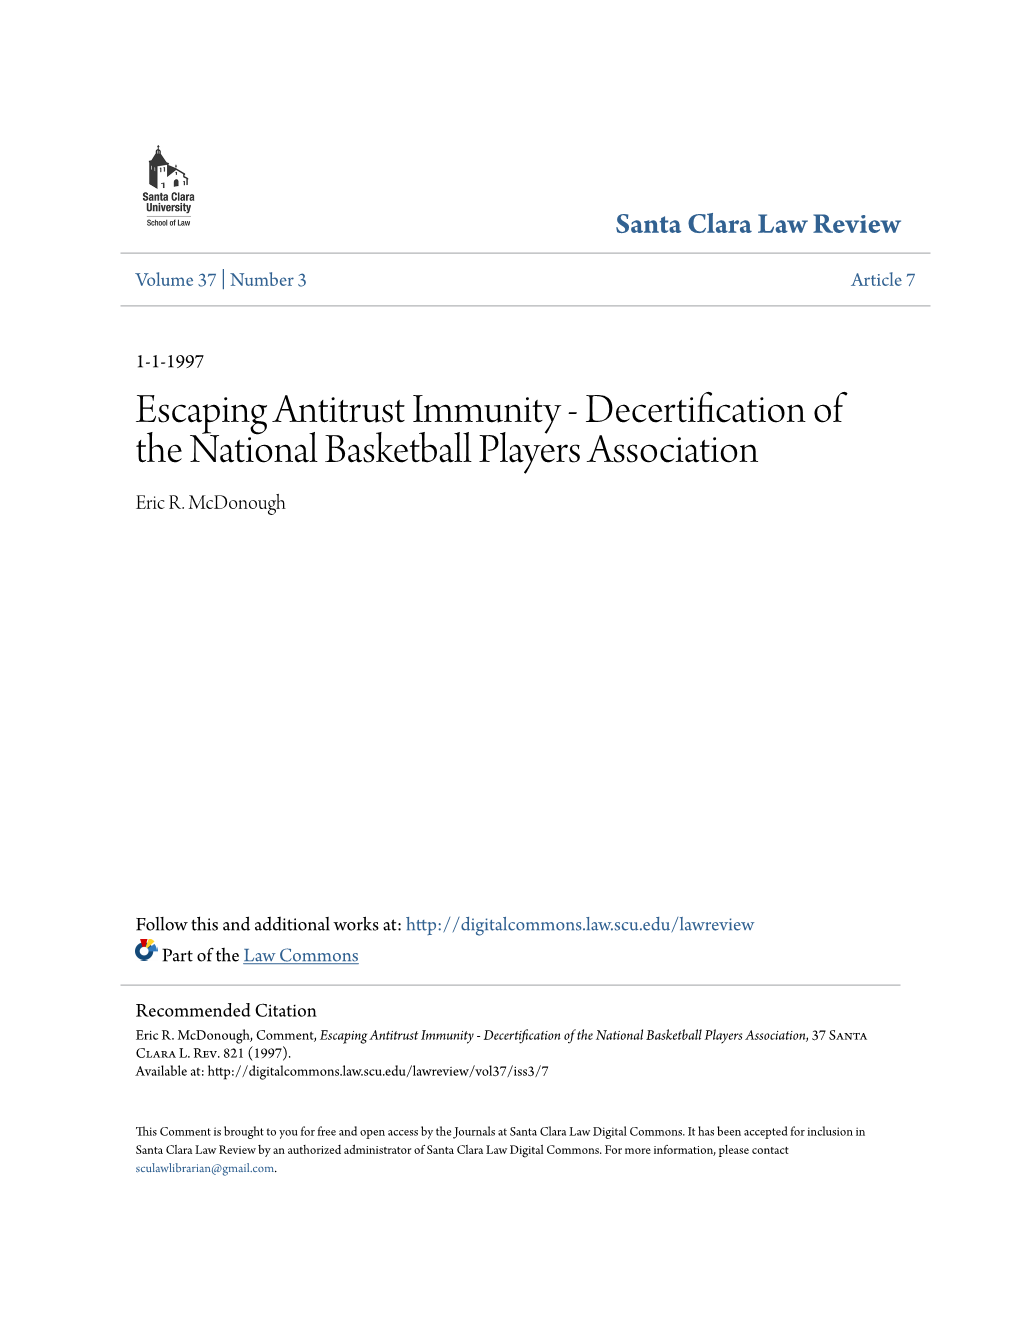 Decertification of the National Basketball Players Association Eric R